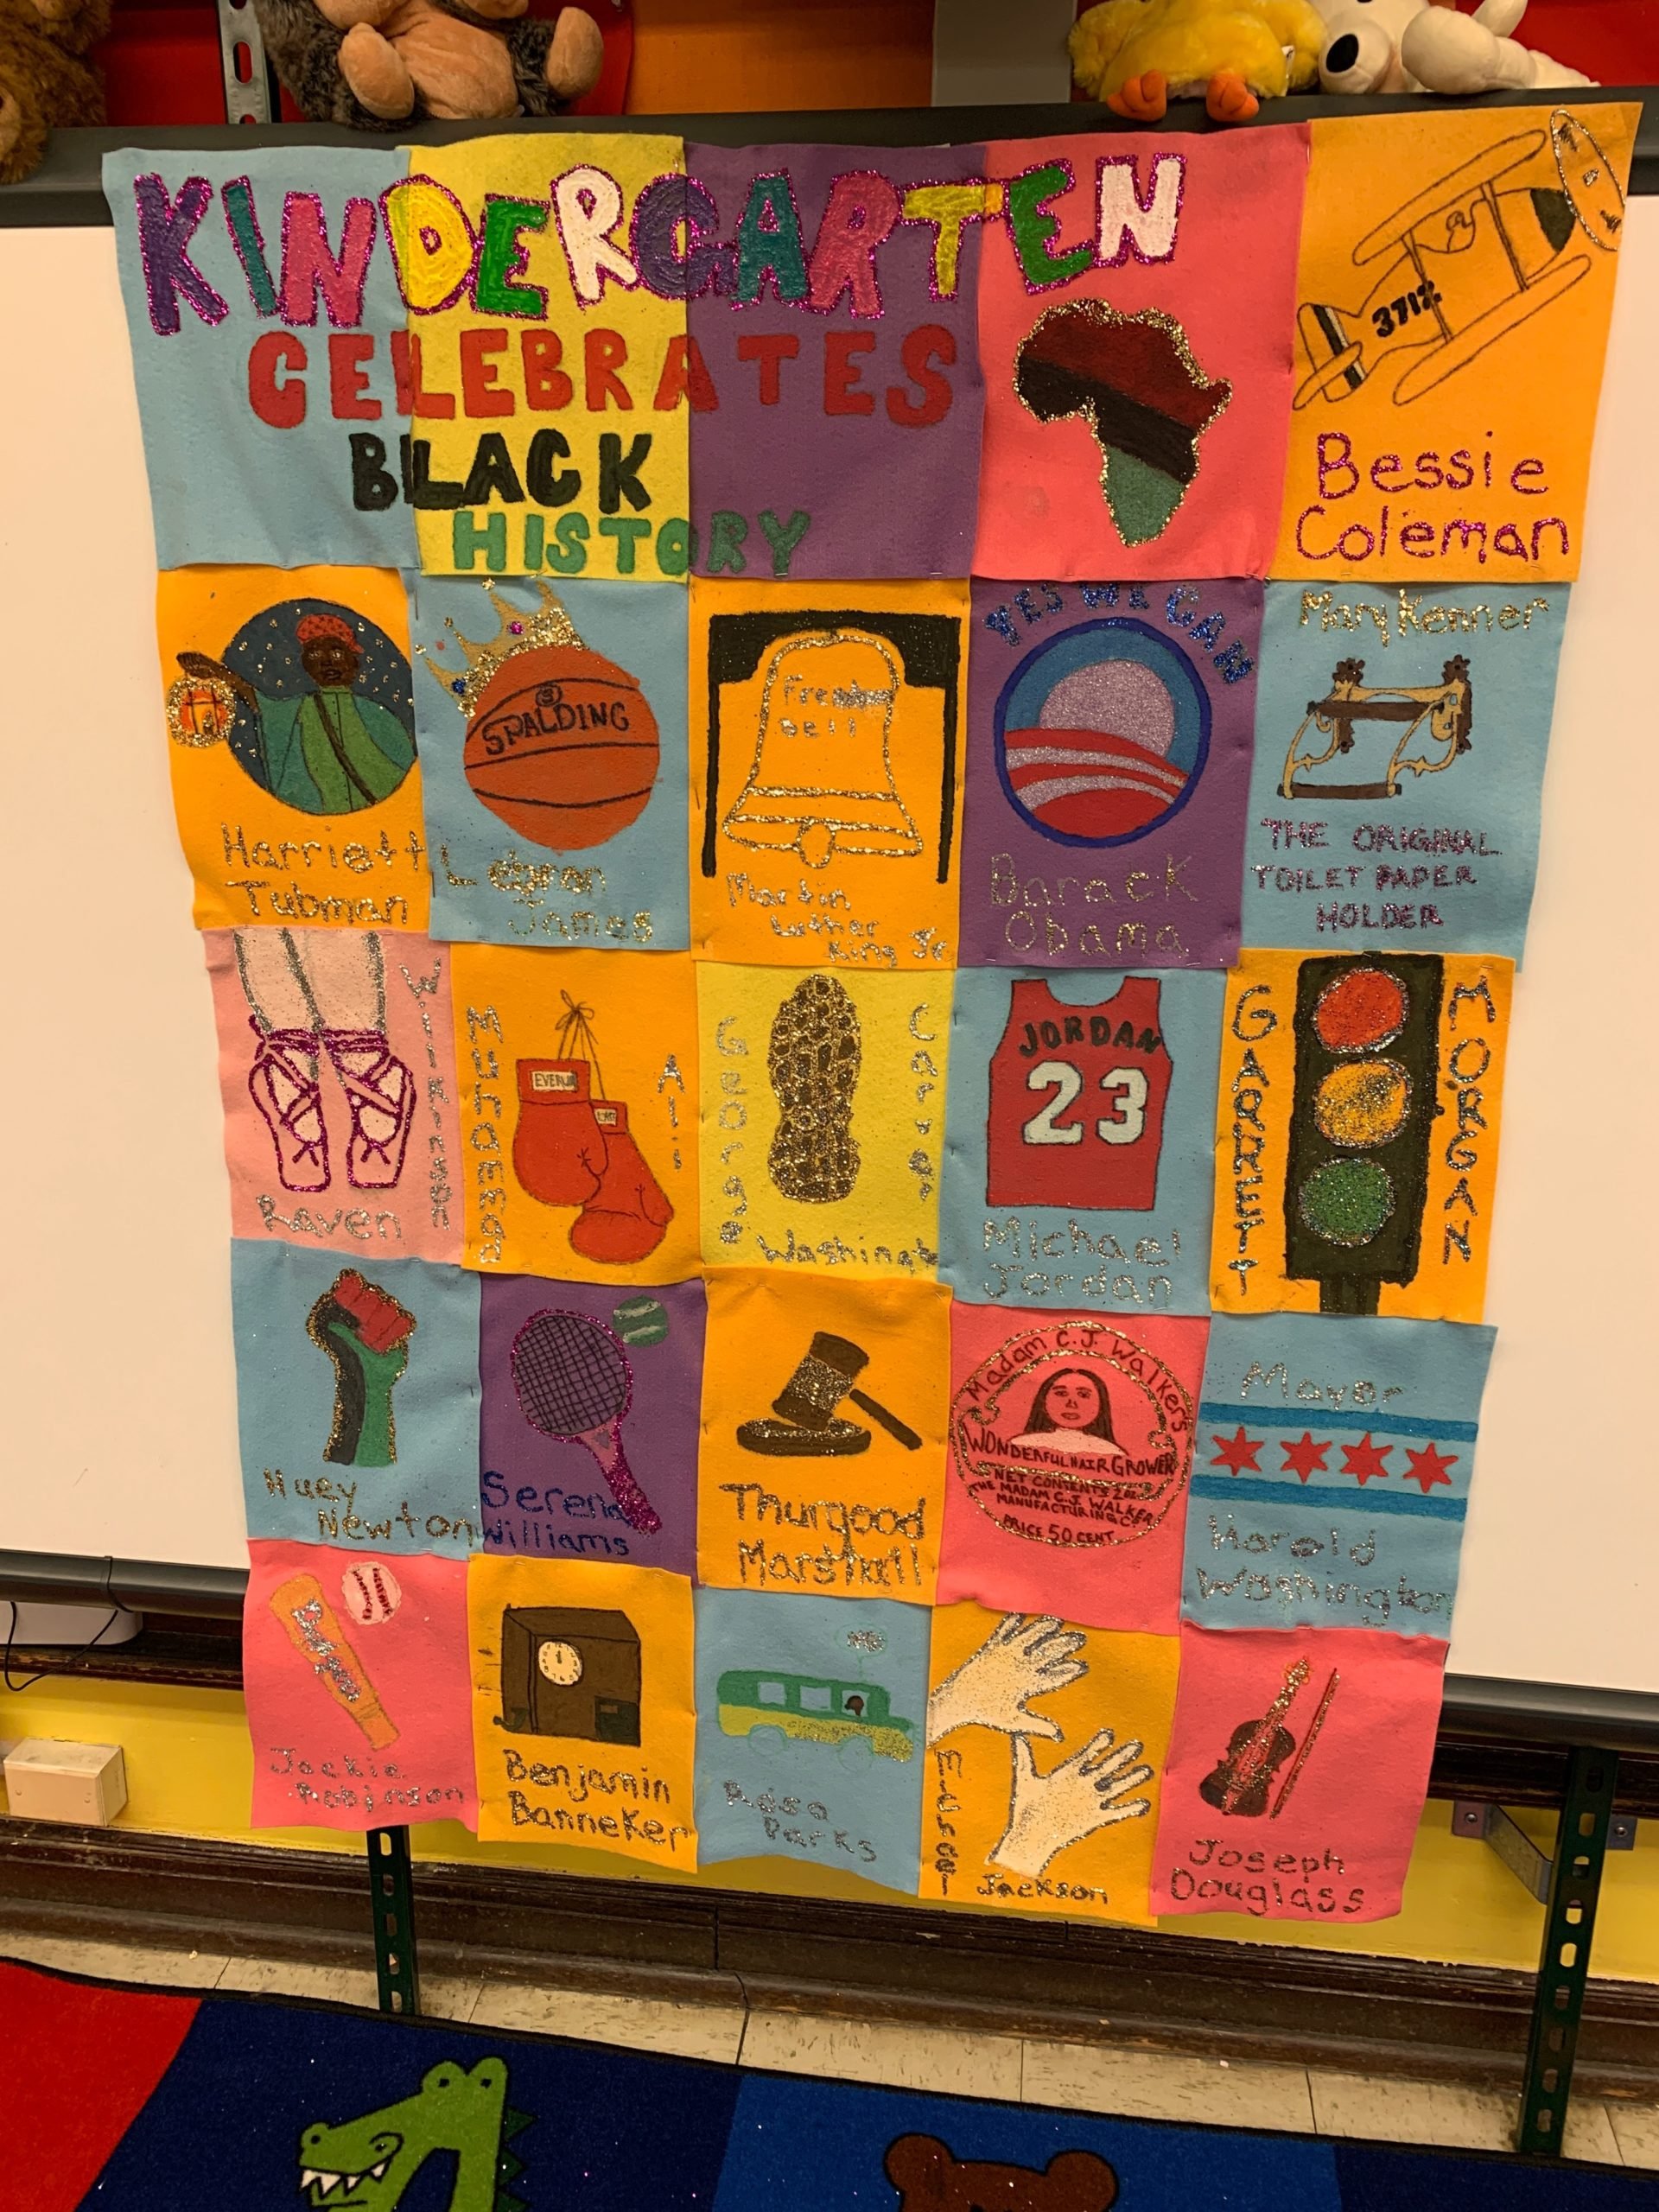 A quilt made of student artwork